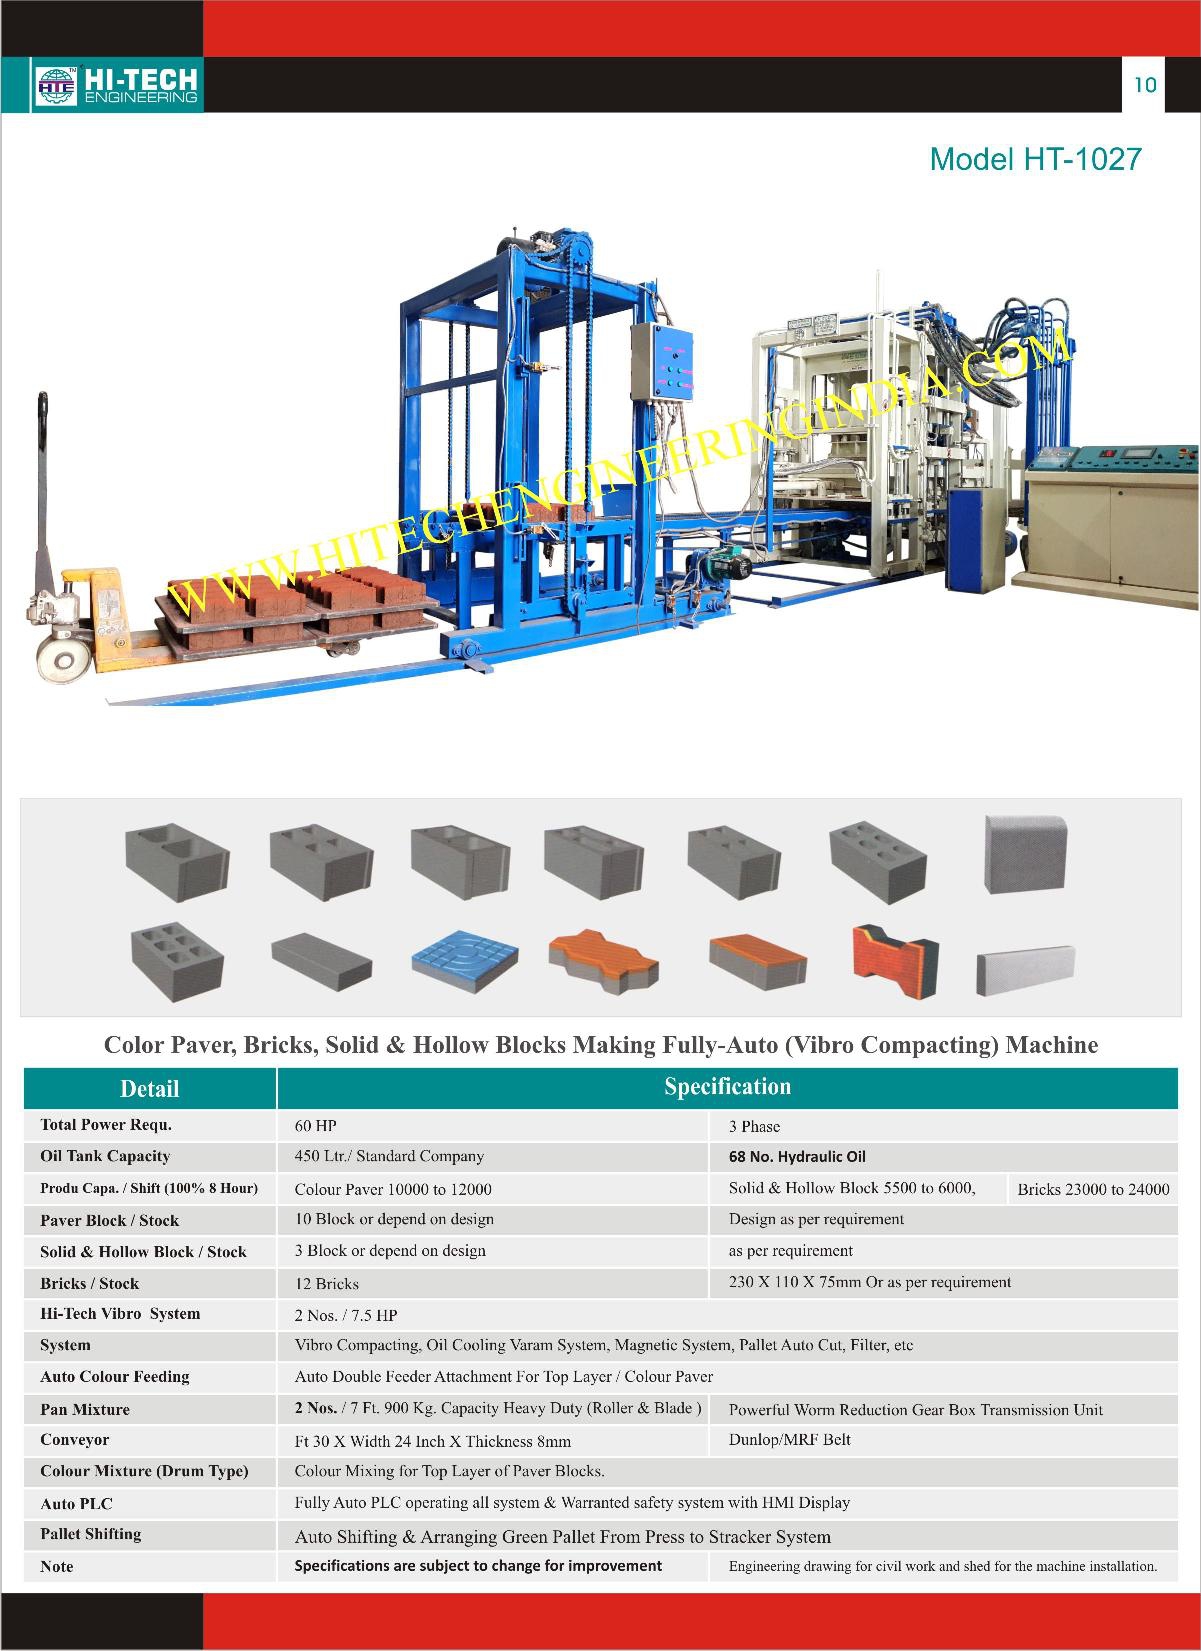 Paver, Bricks, Solid & Hallow Blocks Making fully Auto (Vibro Compacting) from Hi Tech Engineering